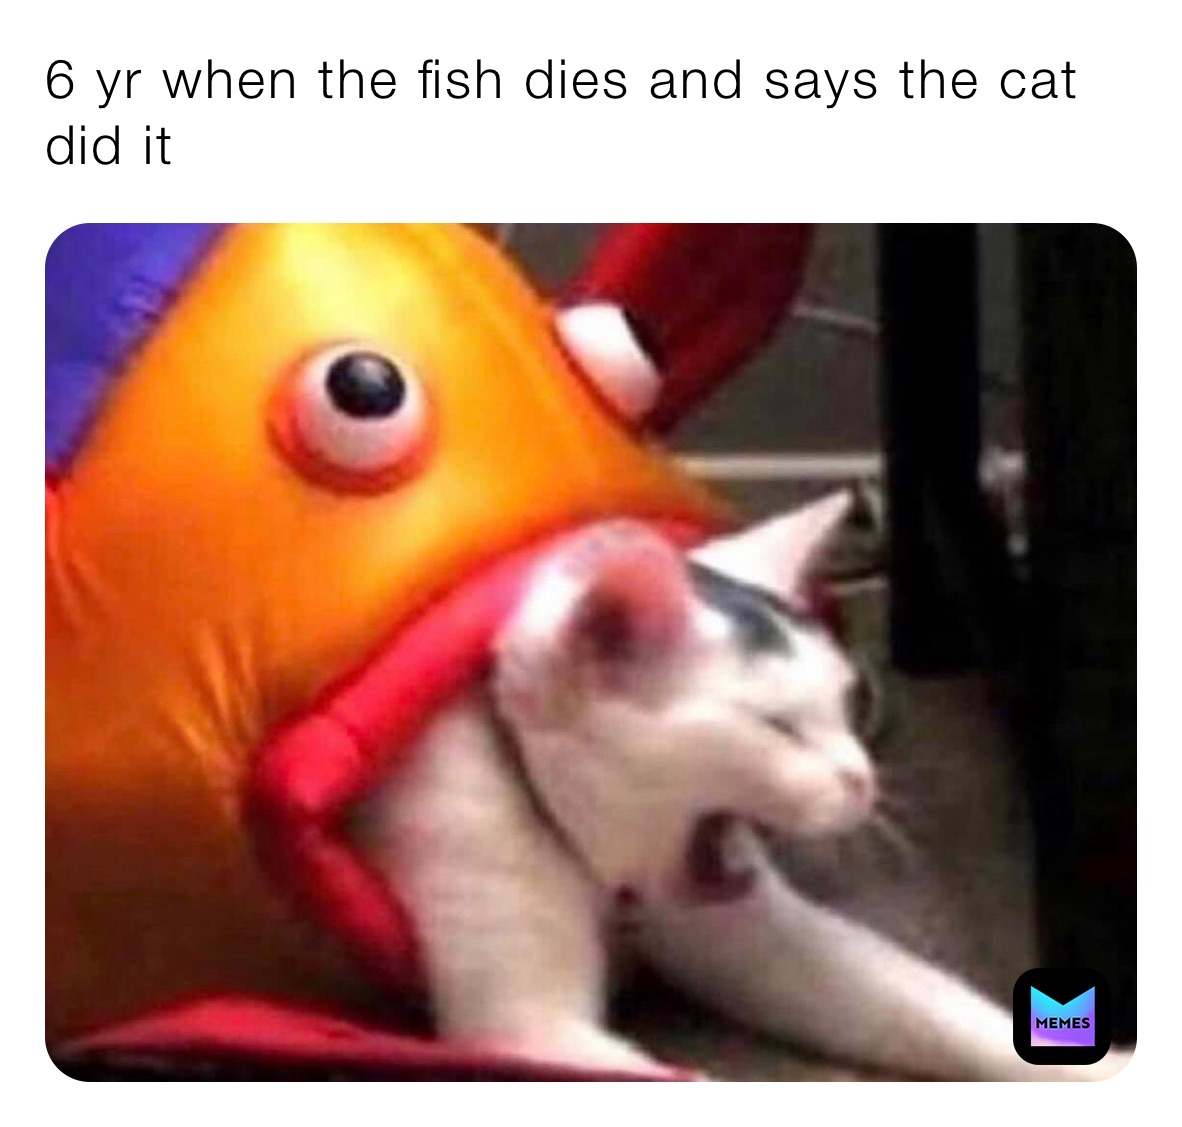 6 yr when the fish dies and says the cat did it